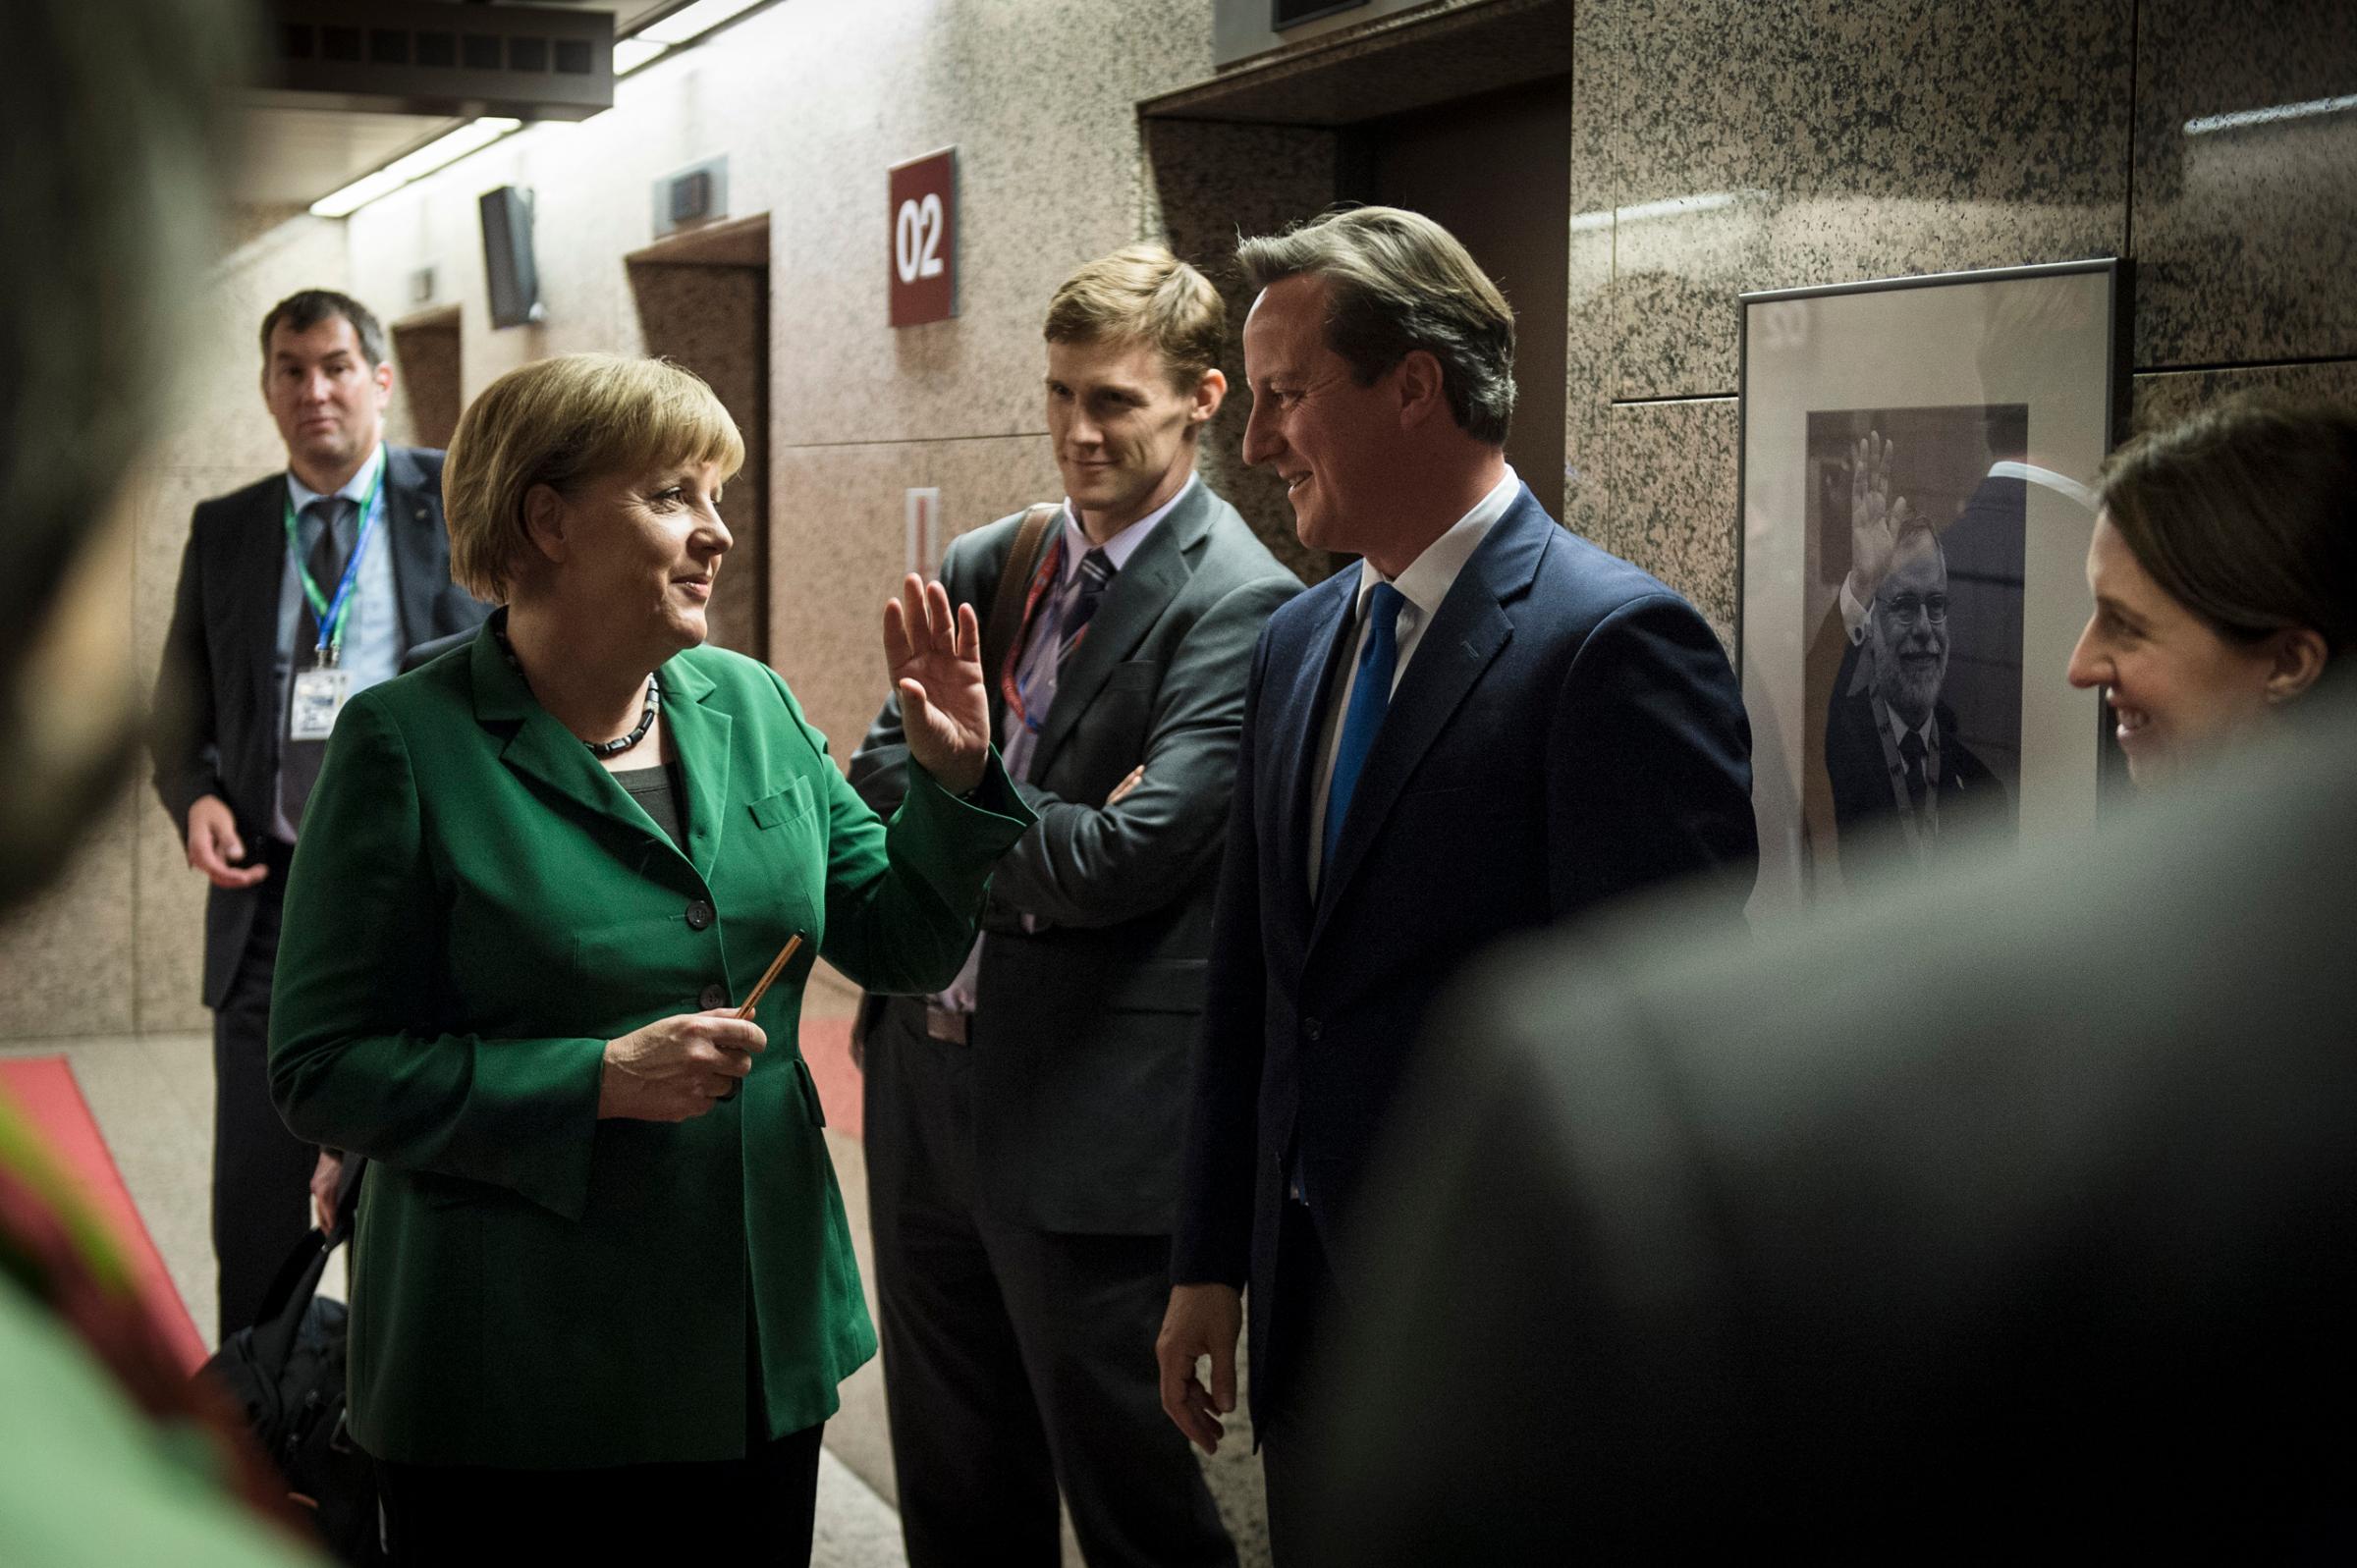 Chancellor Merkel and British Prime Minister David Cameron joke as they wait for their elevators after a European Council meeting in Brussels. Oct. 19, 2012.